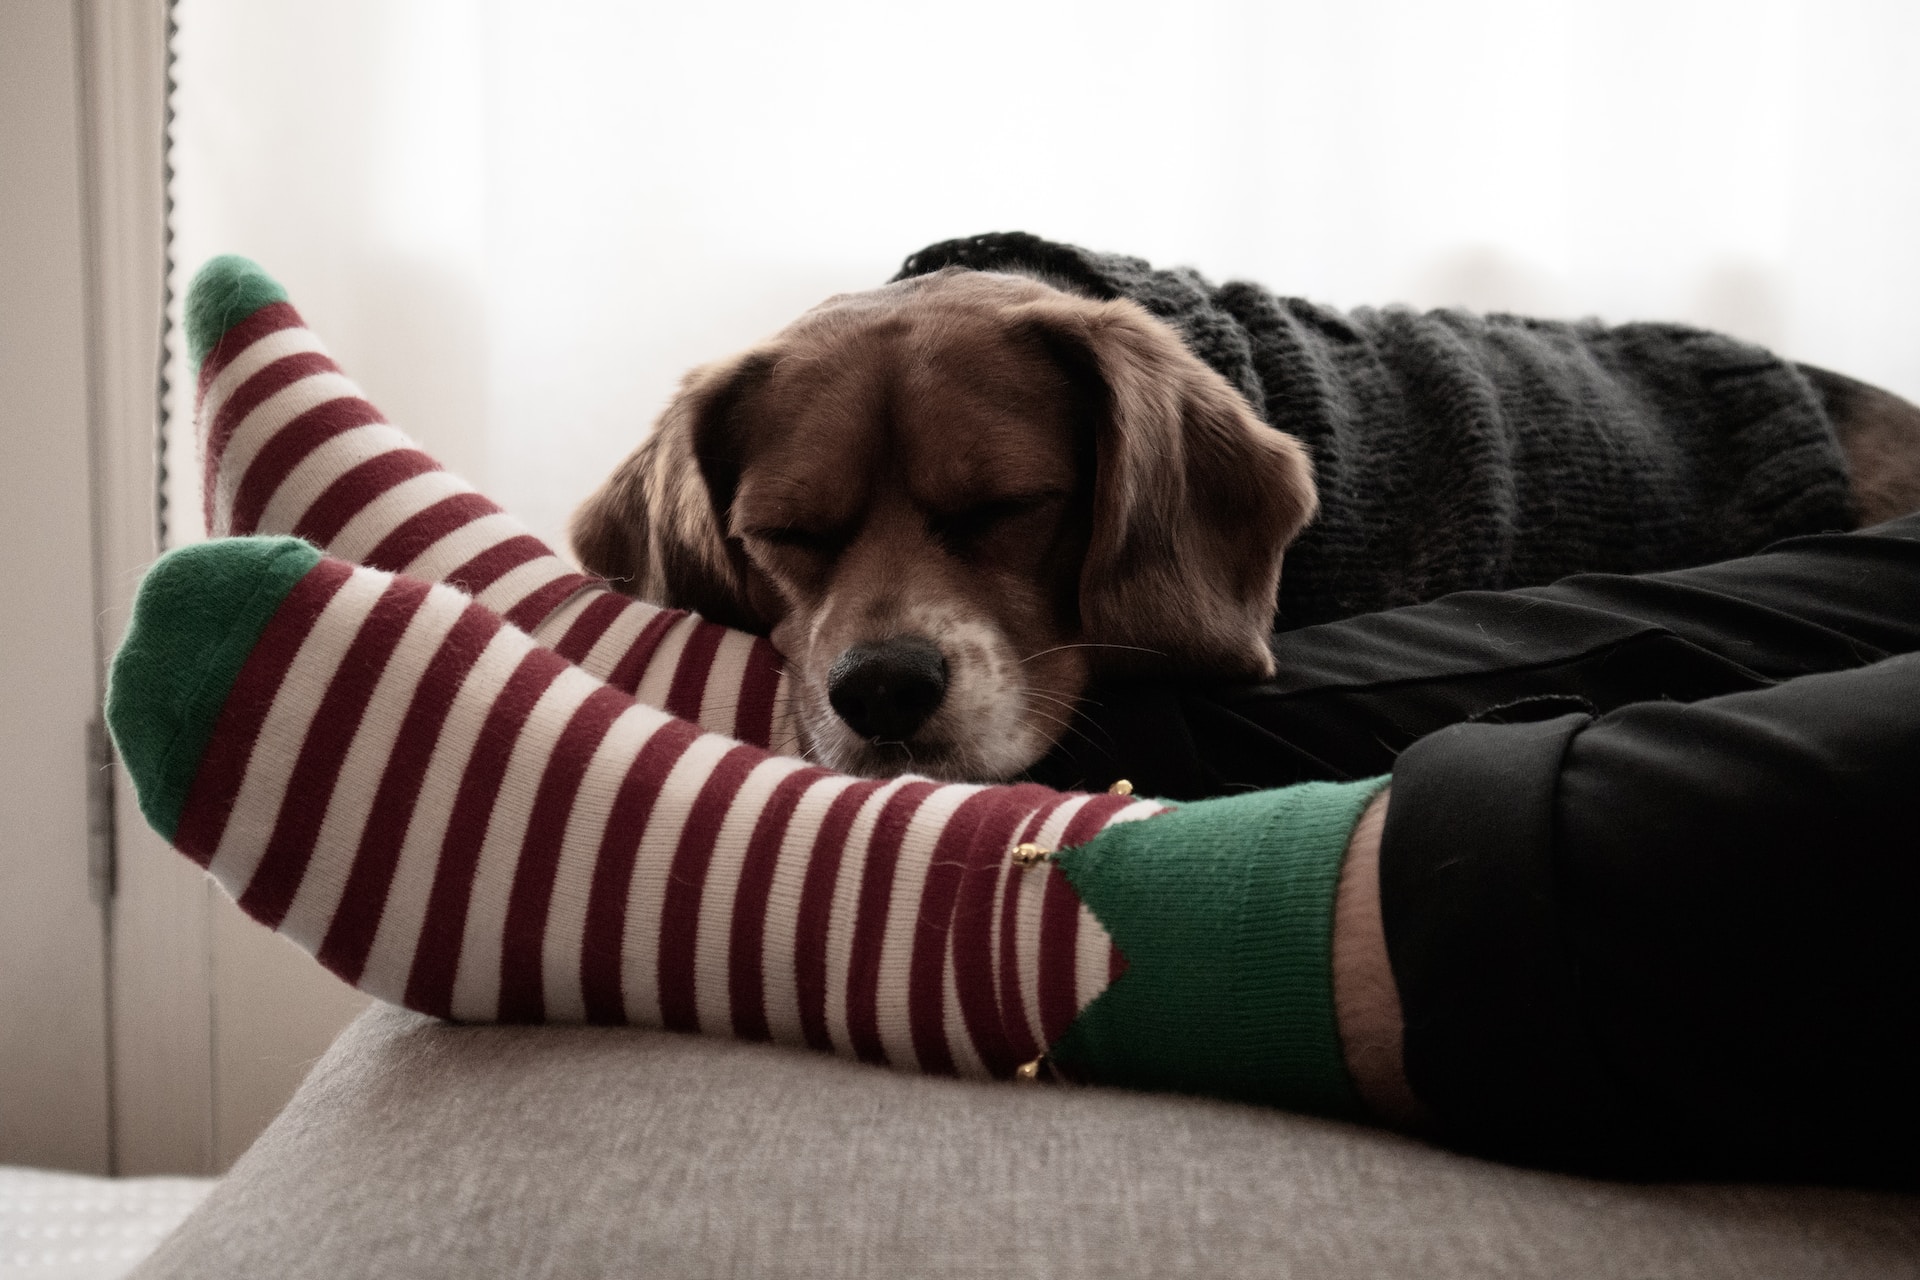 Socks on or Off? The Benefits of Sleeping with Socks